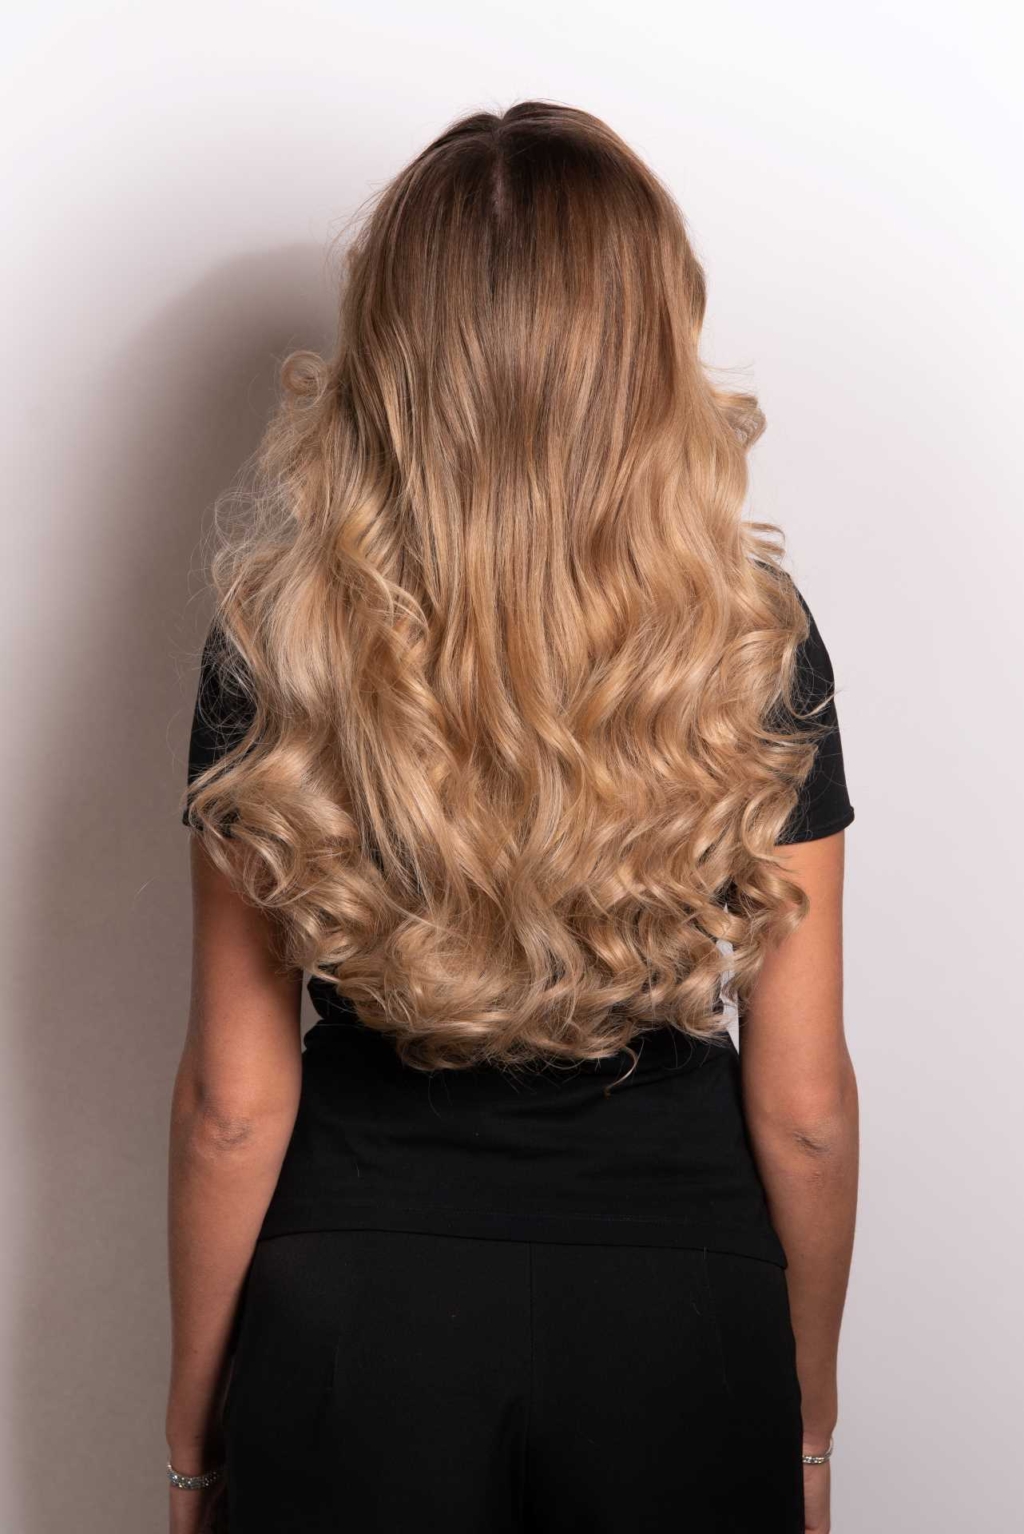 Hair extension with balayage hair